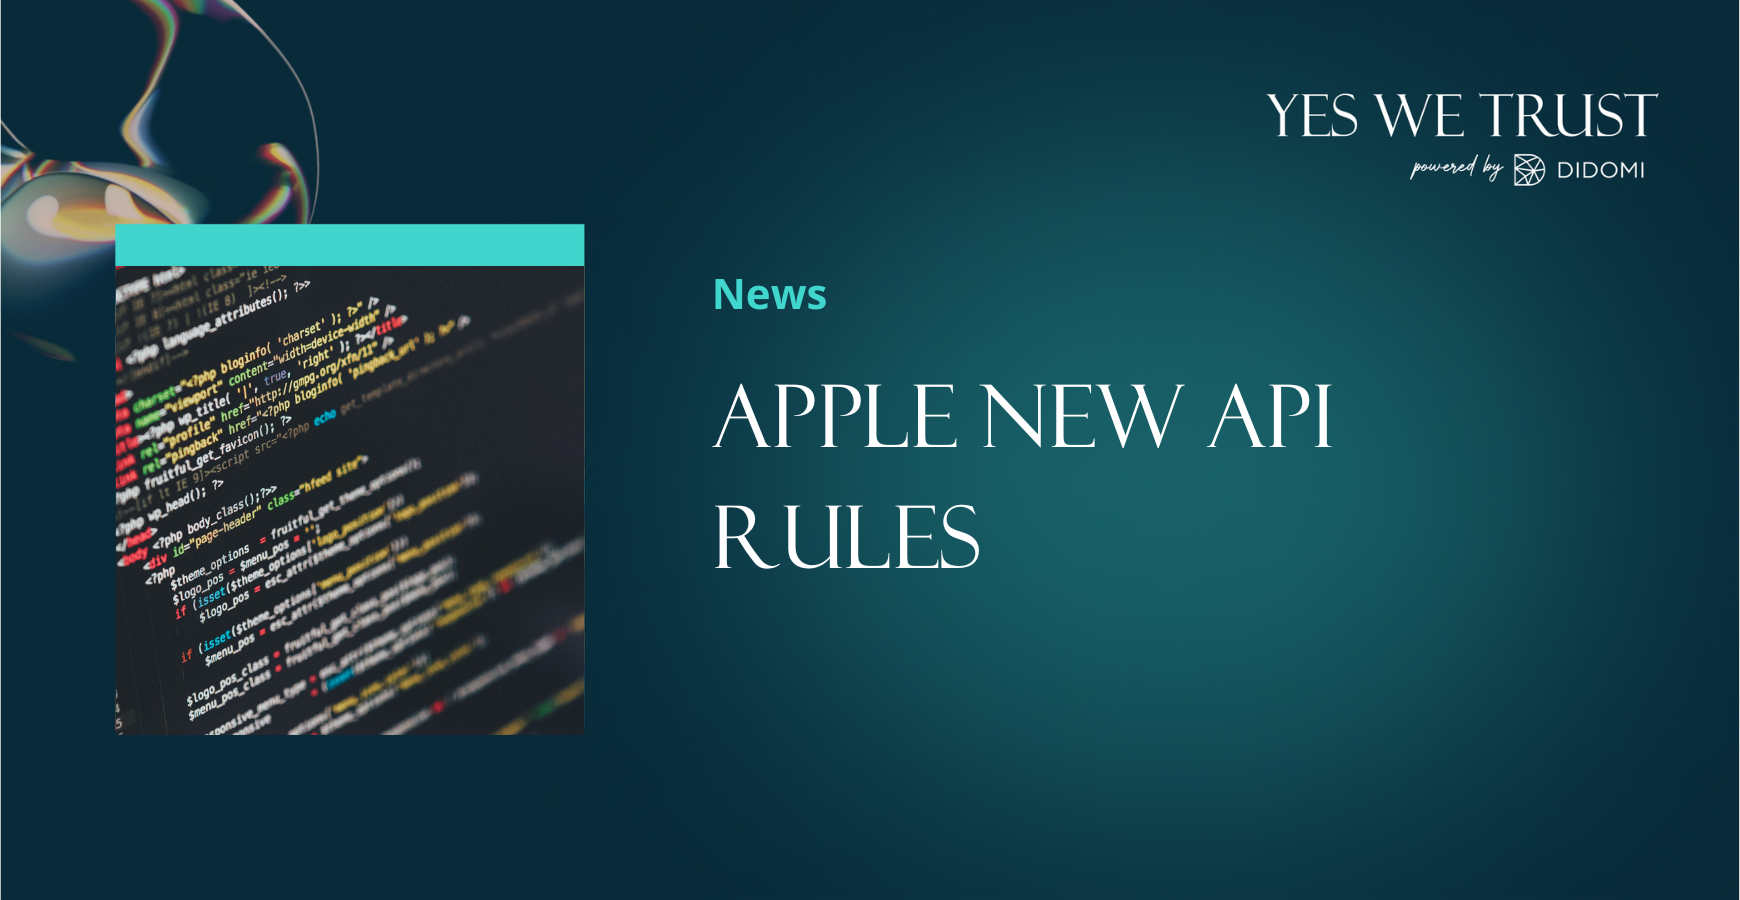 Apple doubles down on privacy commitment with new API rules